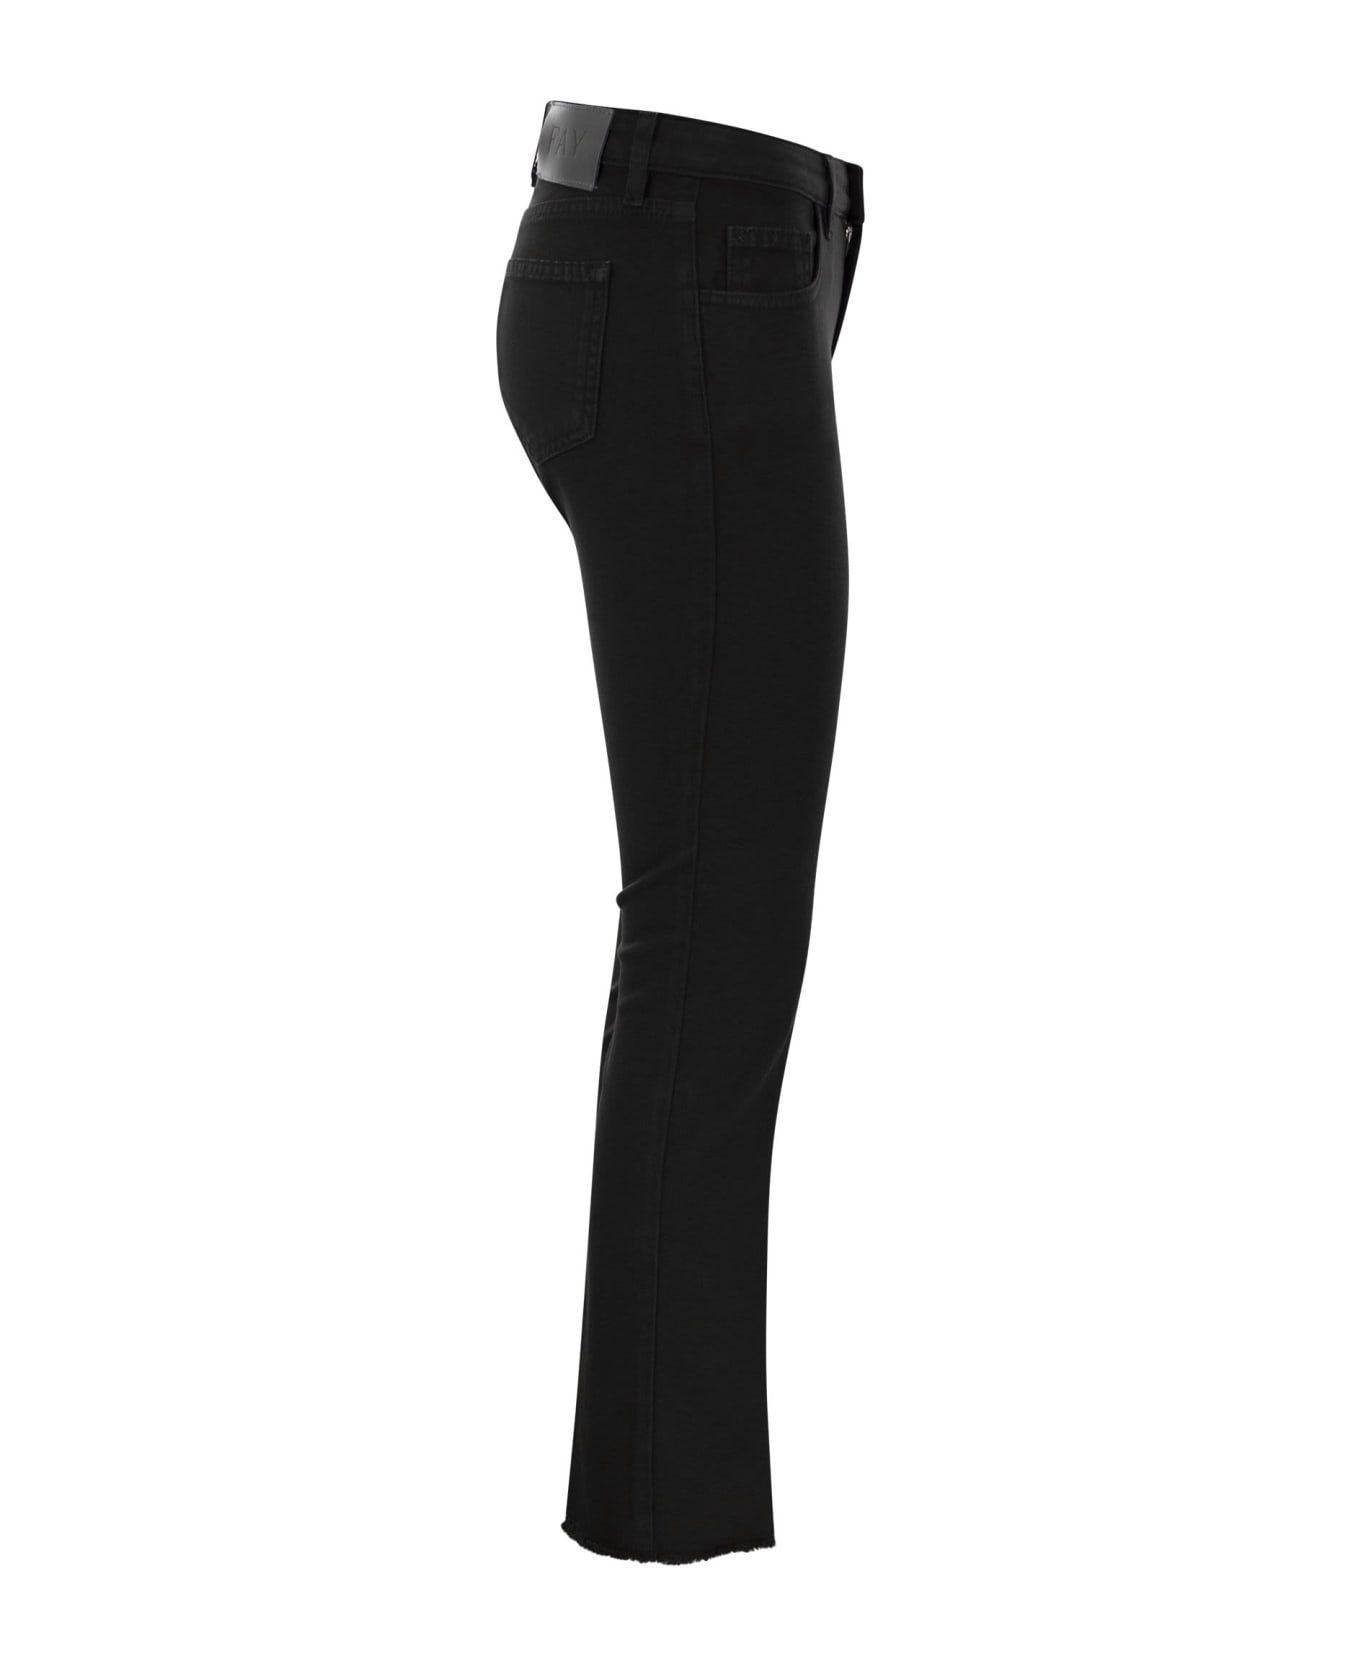 Fay 5-pocket pyo Trousers In Stretch Cotton. - Black